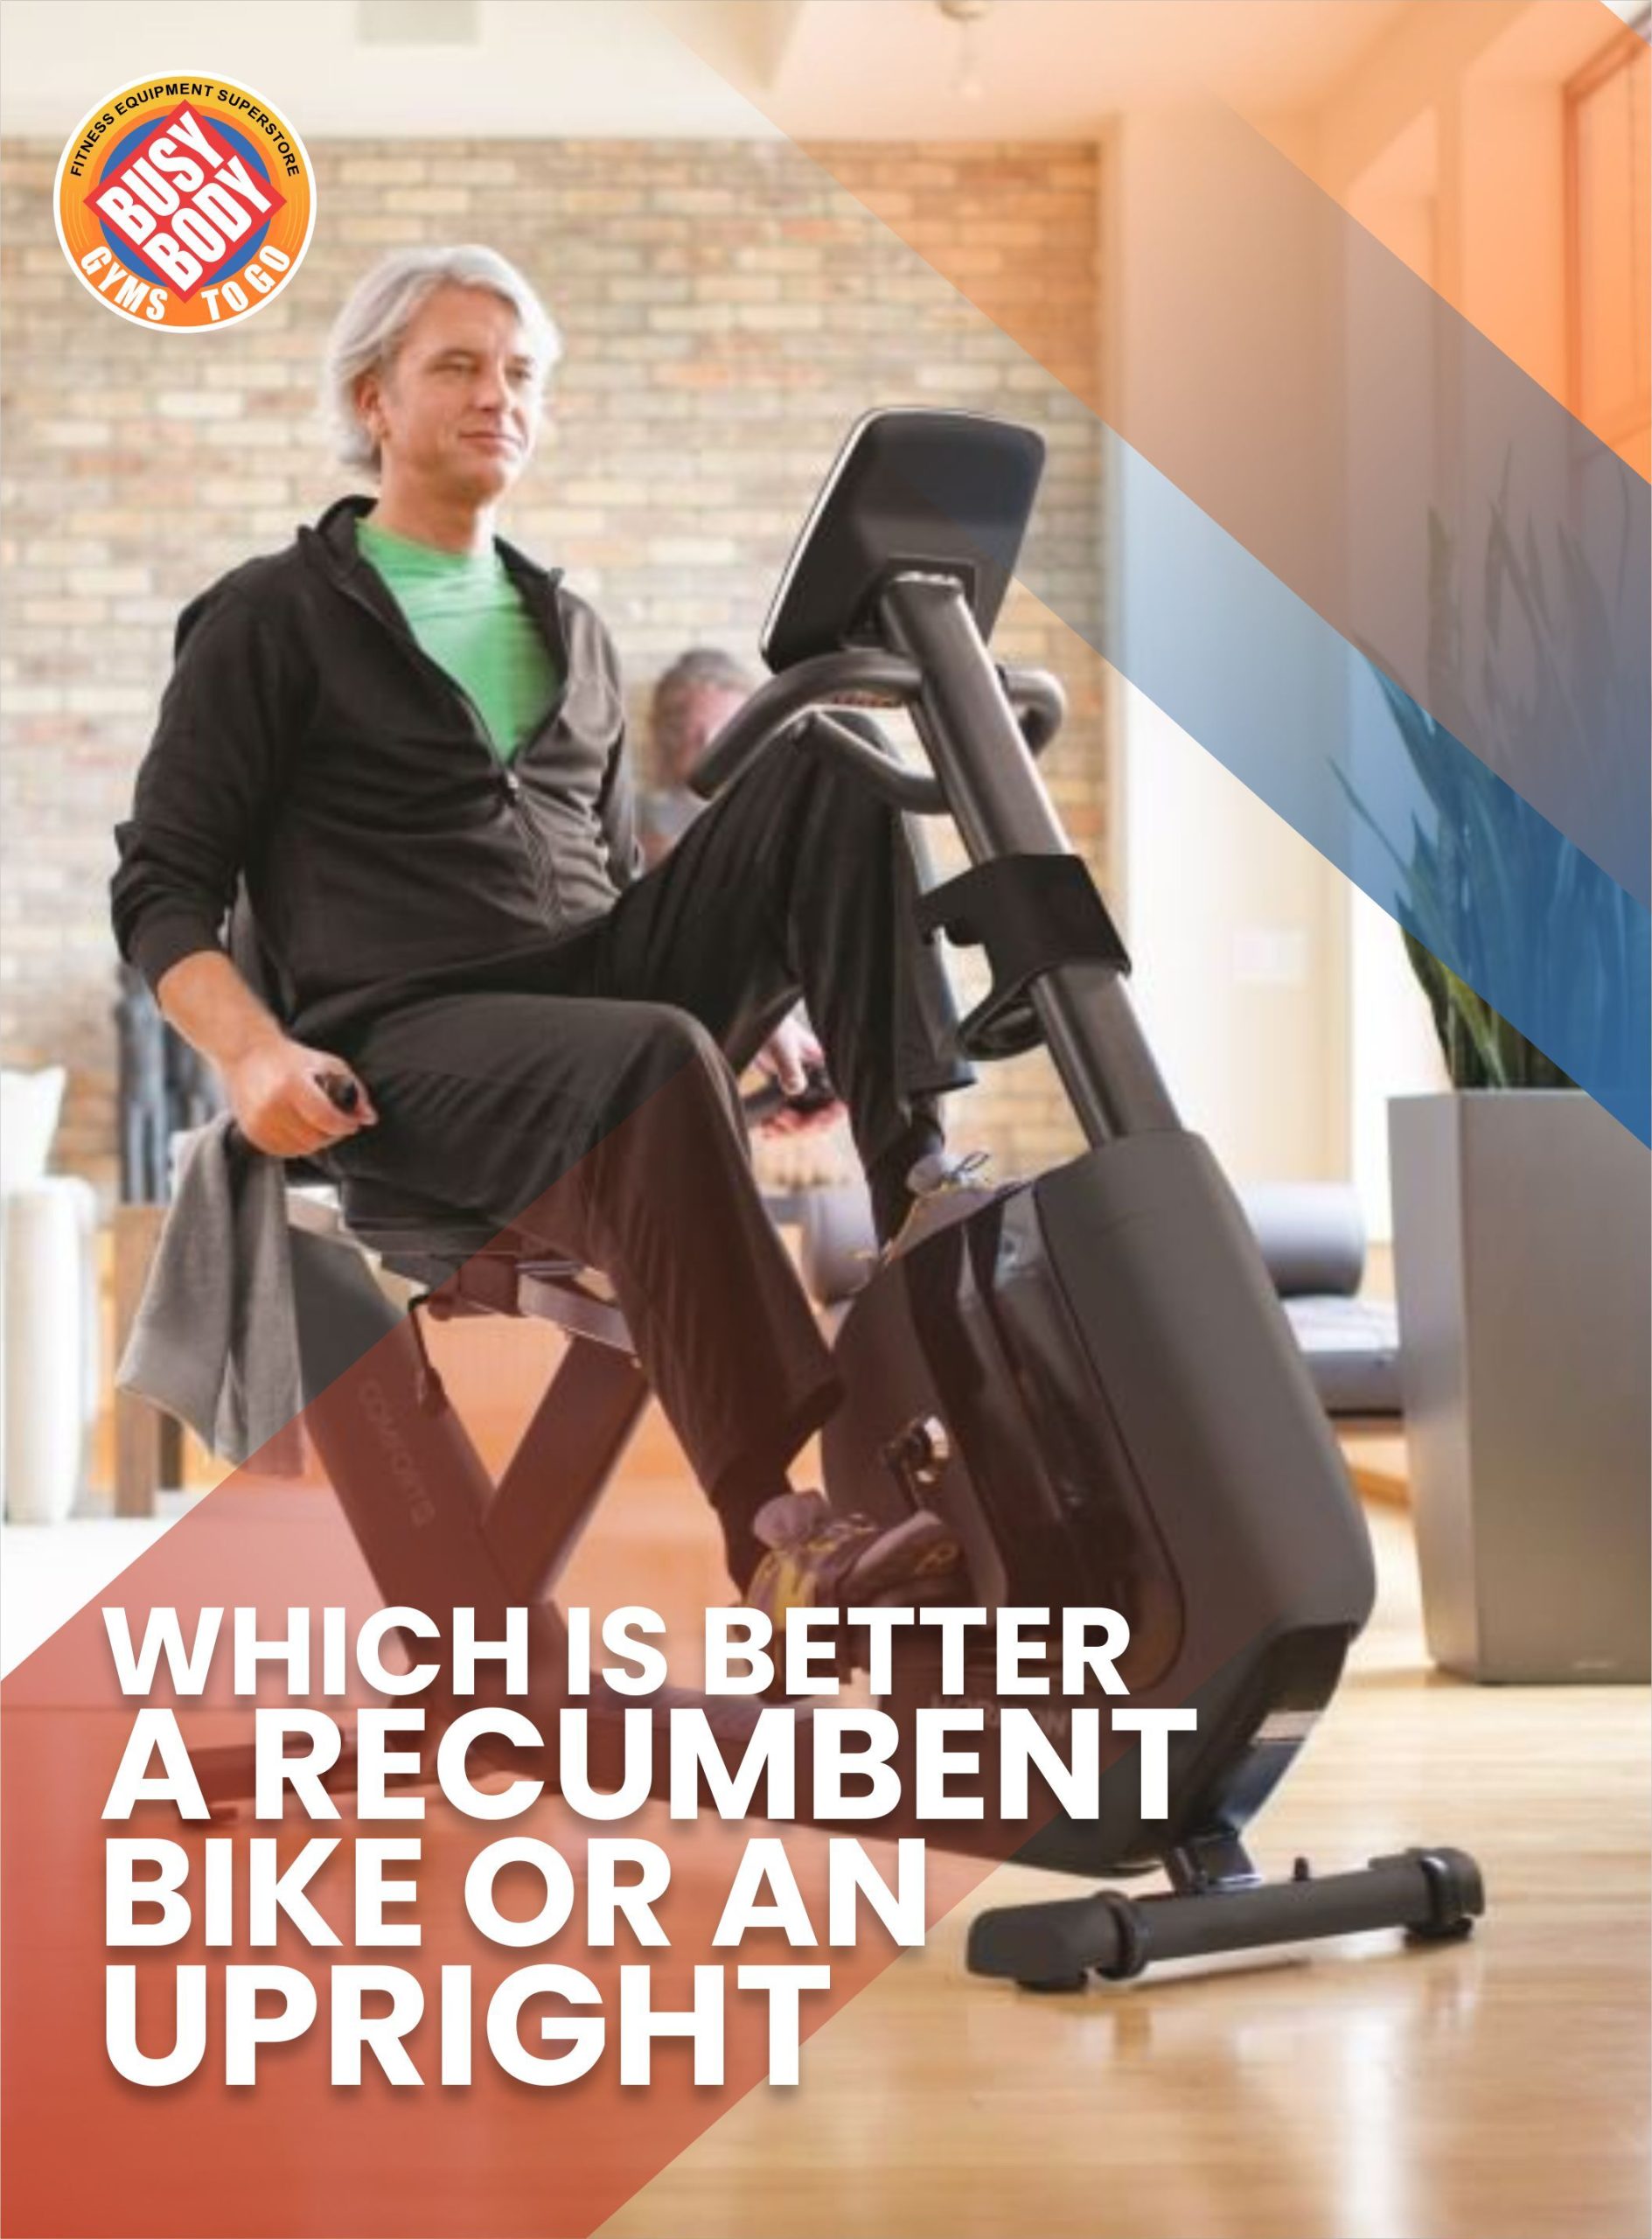 Which Is Better A Recumbent Bike or An Upright?